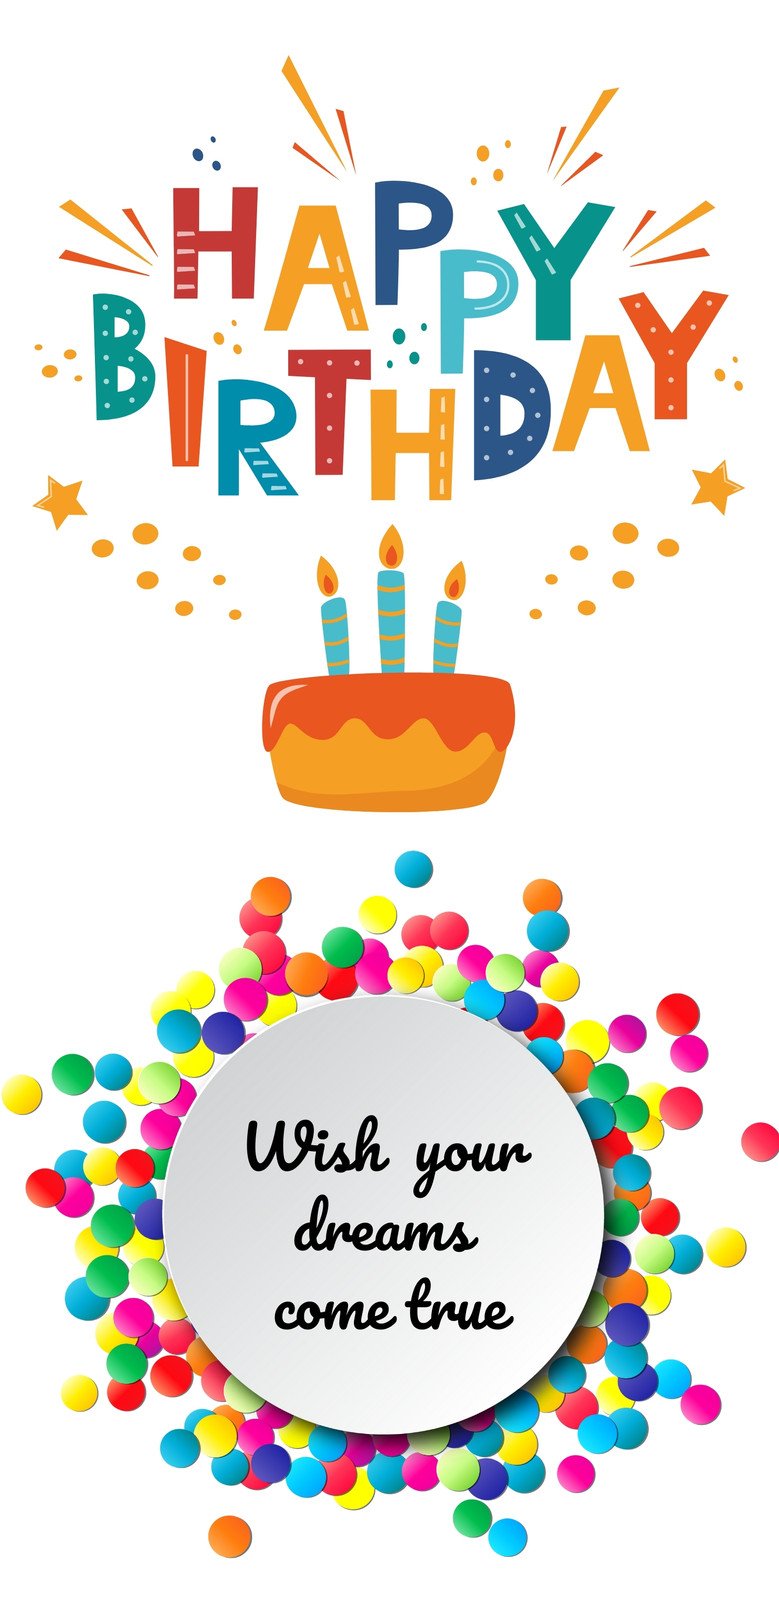 Fun Stickers - Free birthday and party Stickers